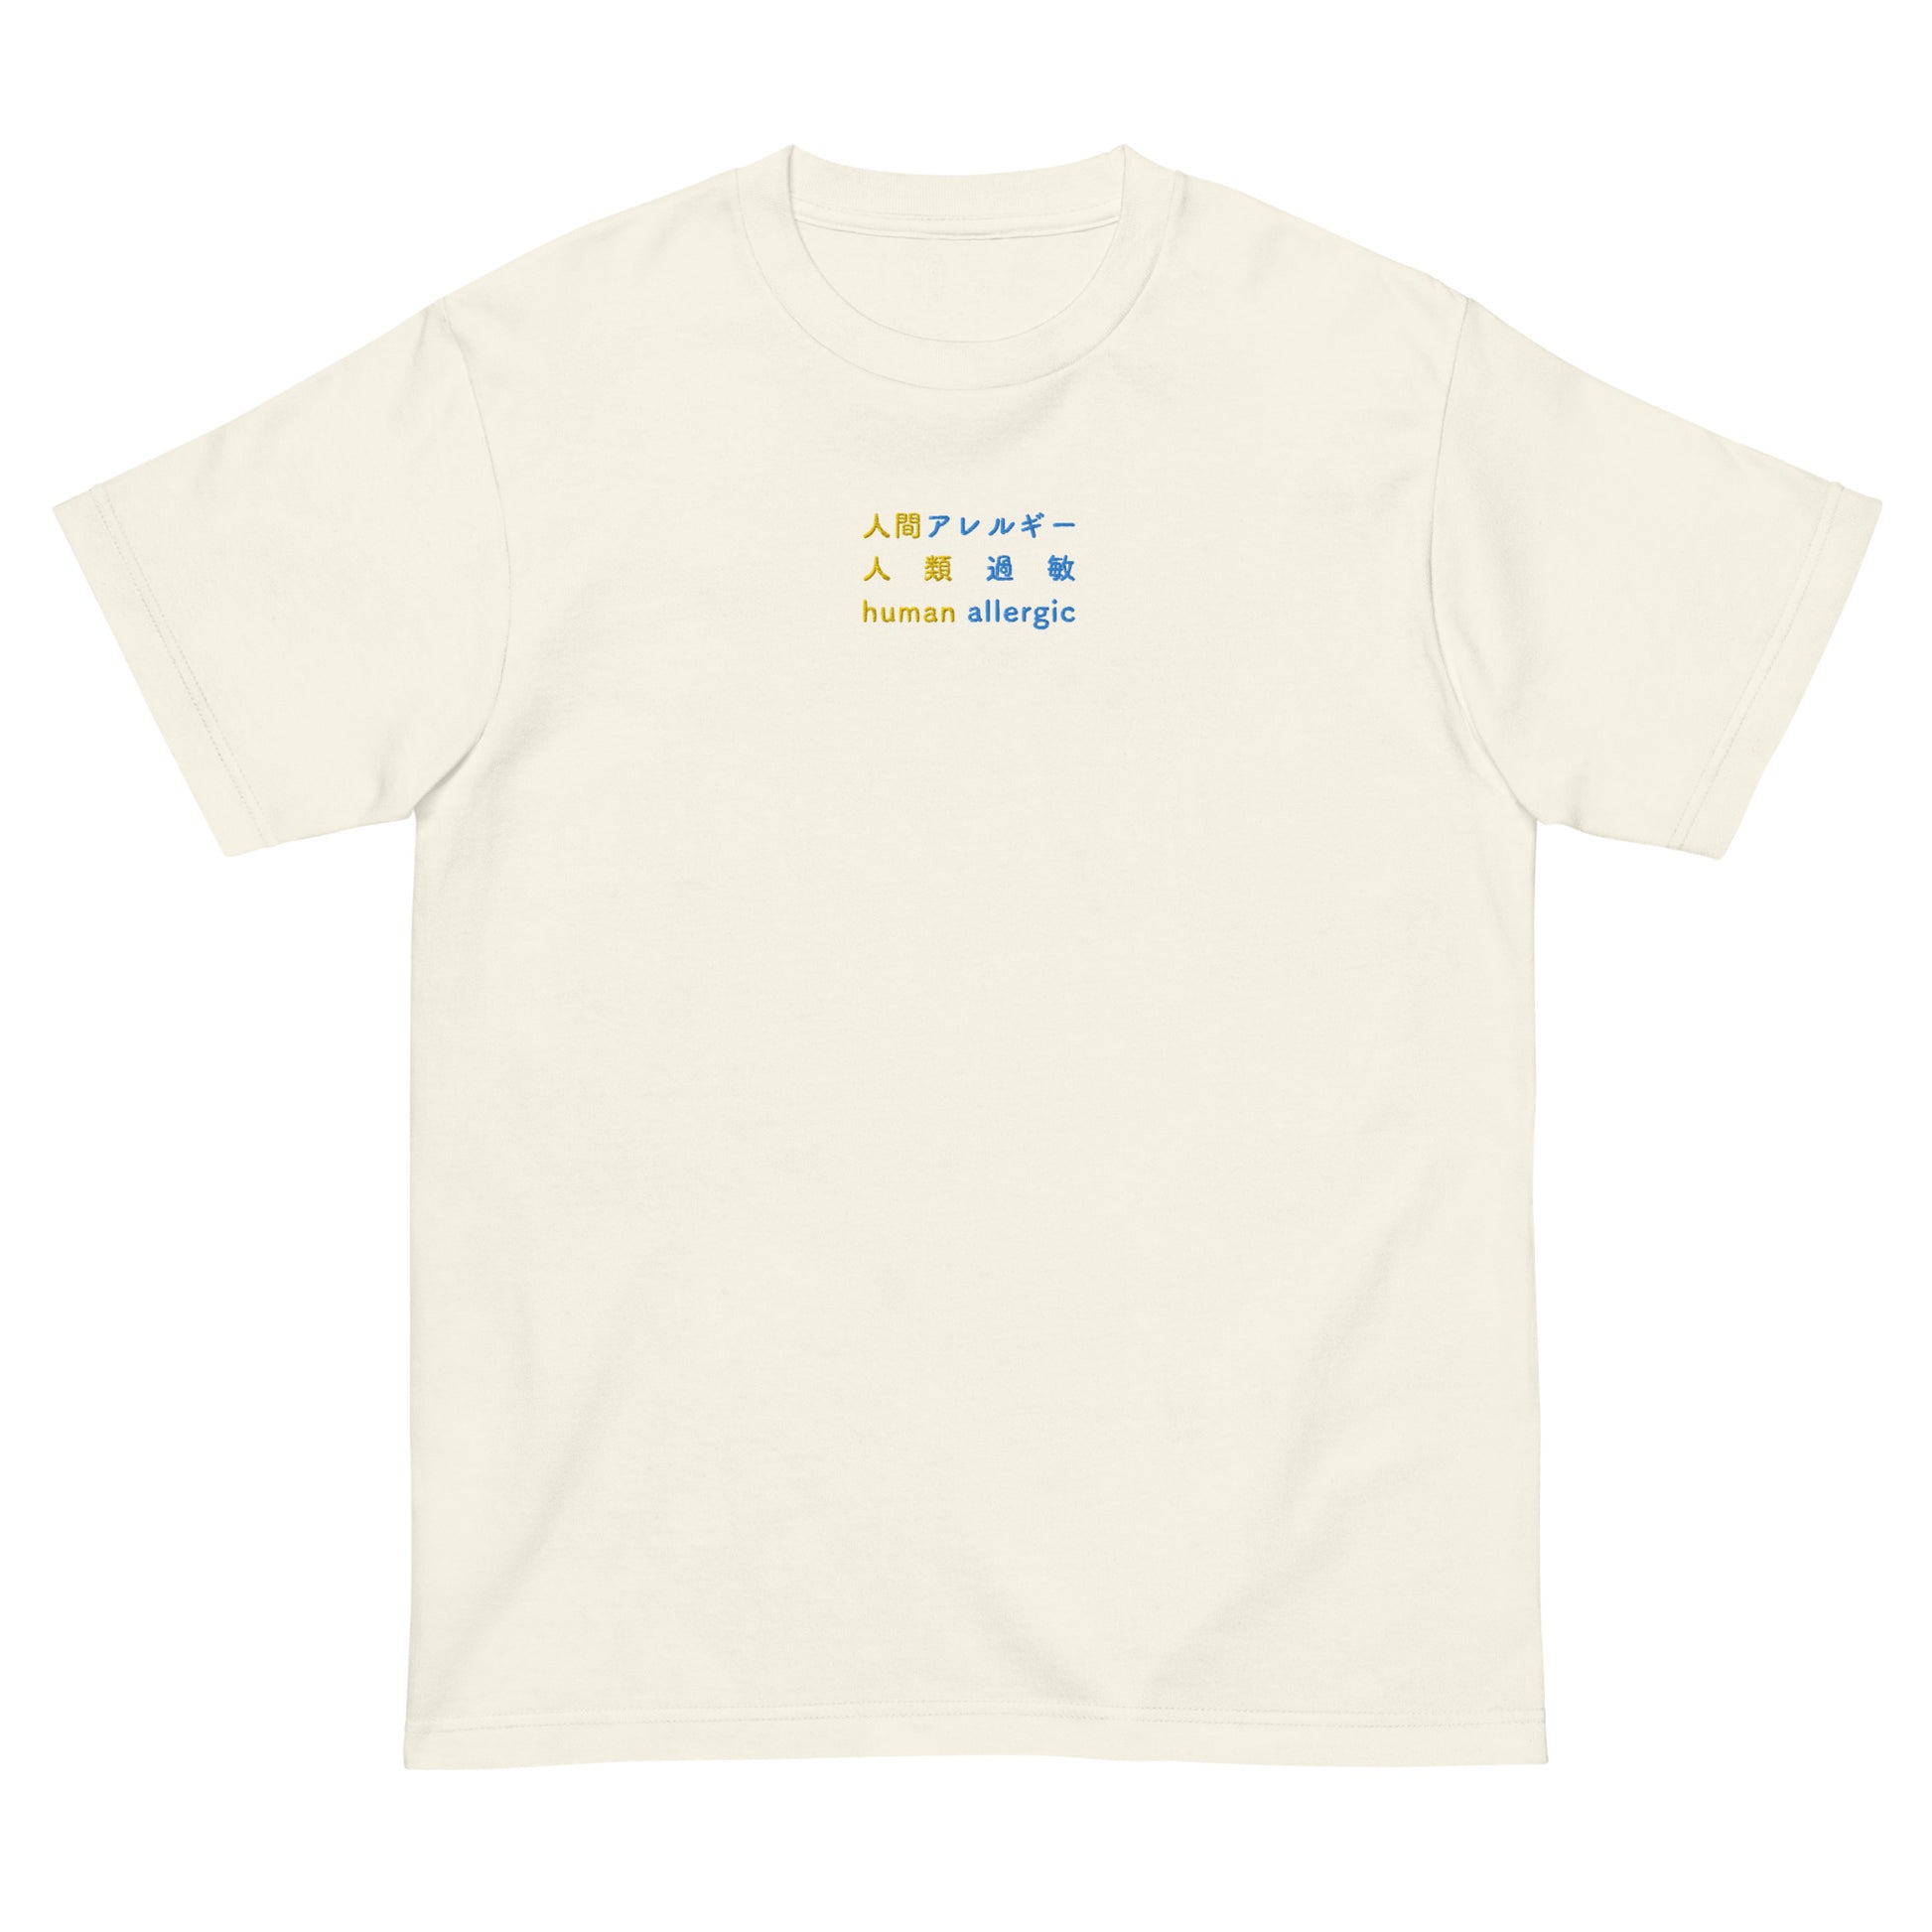 Ivory High Quality Tee - Front Design with an Yellow, Blue Embroidery "Human Allergic" in Japanese,Chinese and English